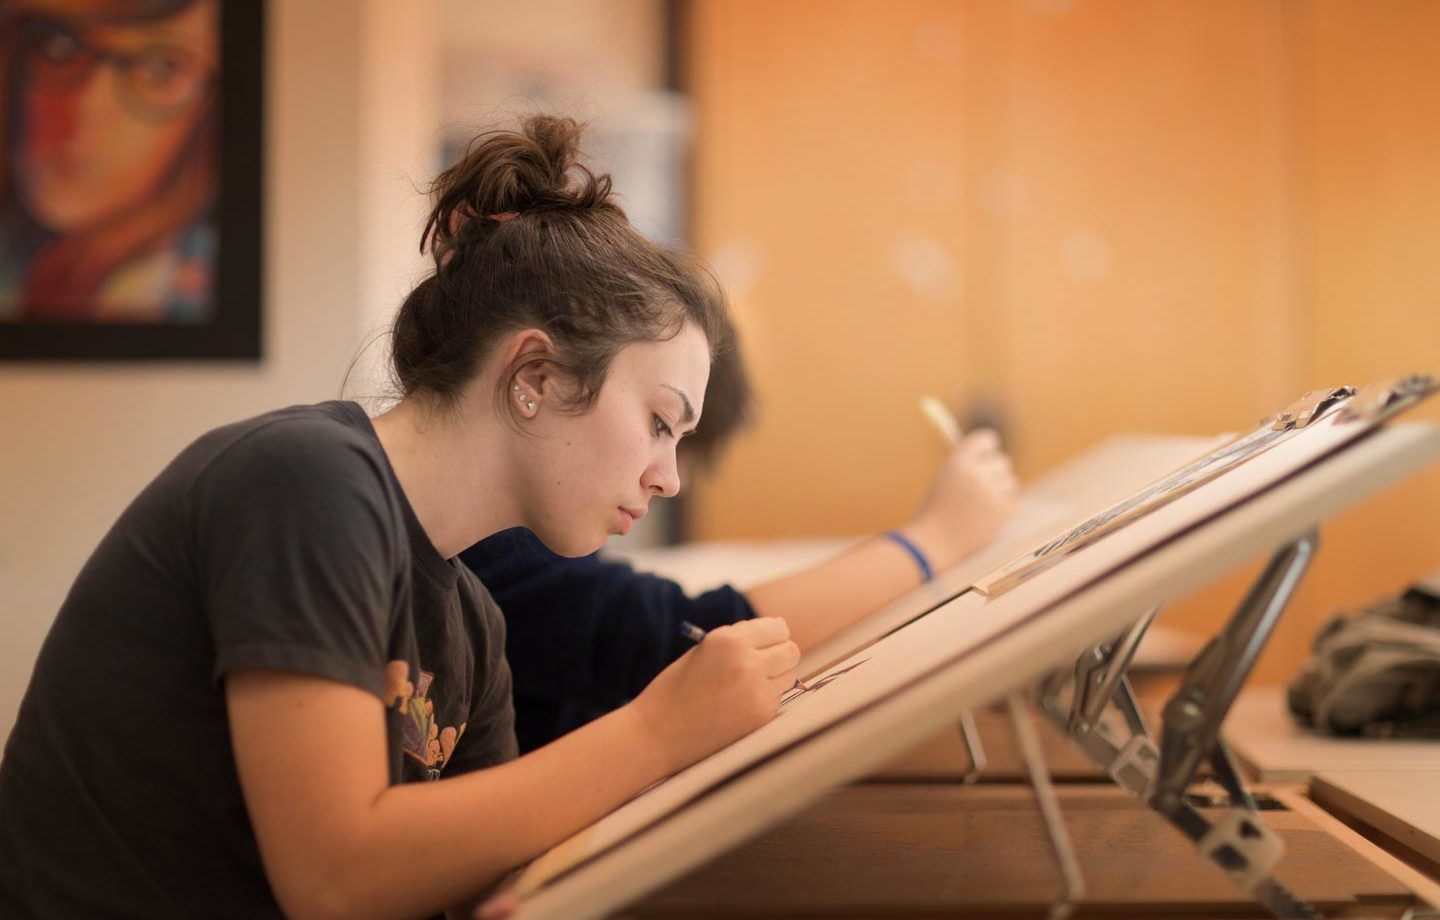 High school student sketching at a drafting table